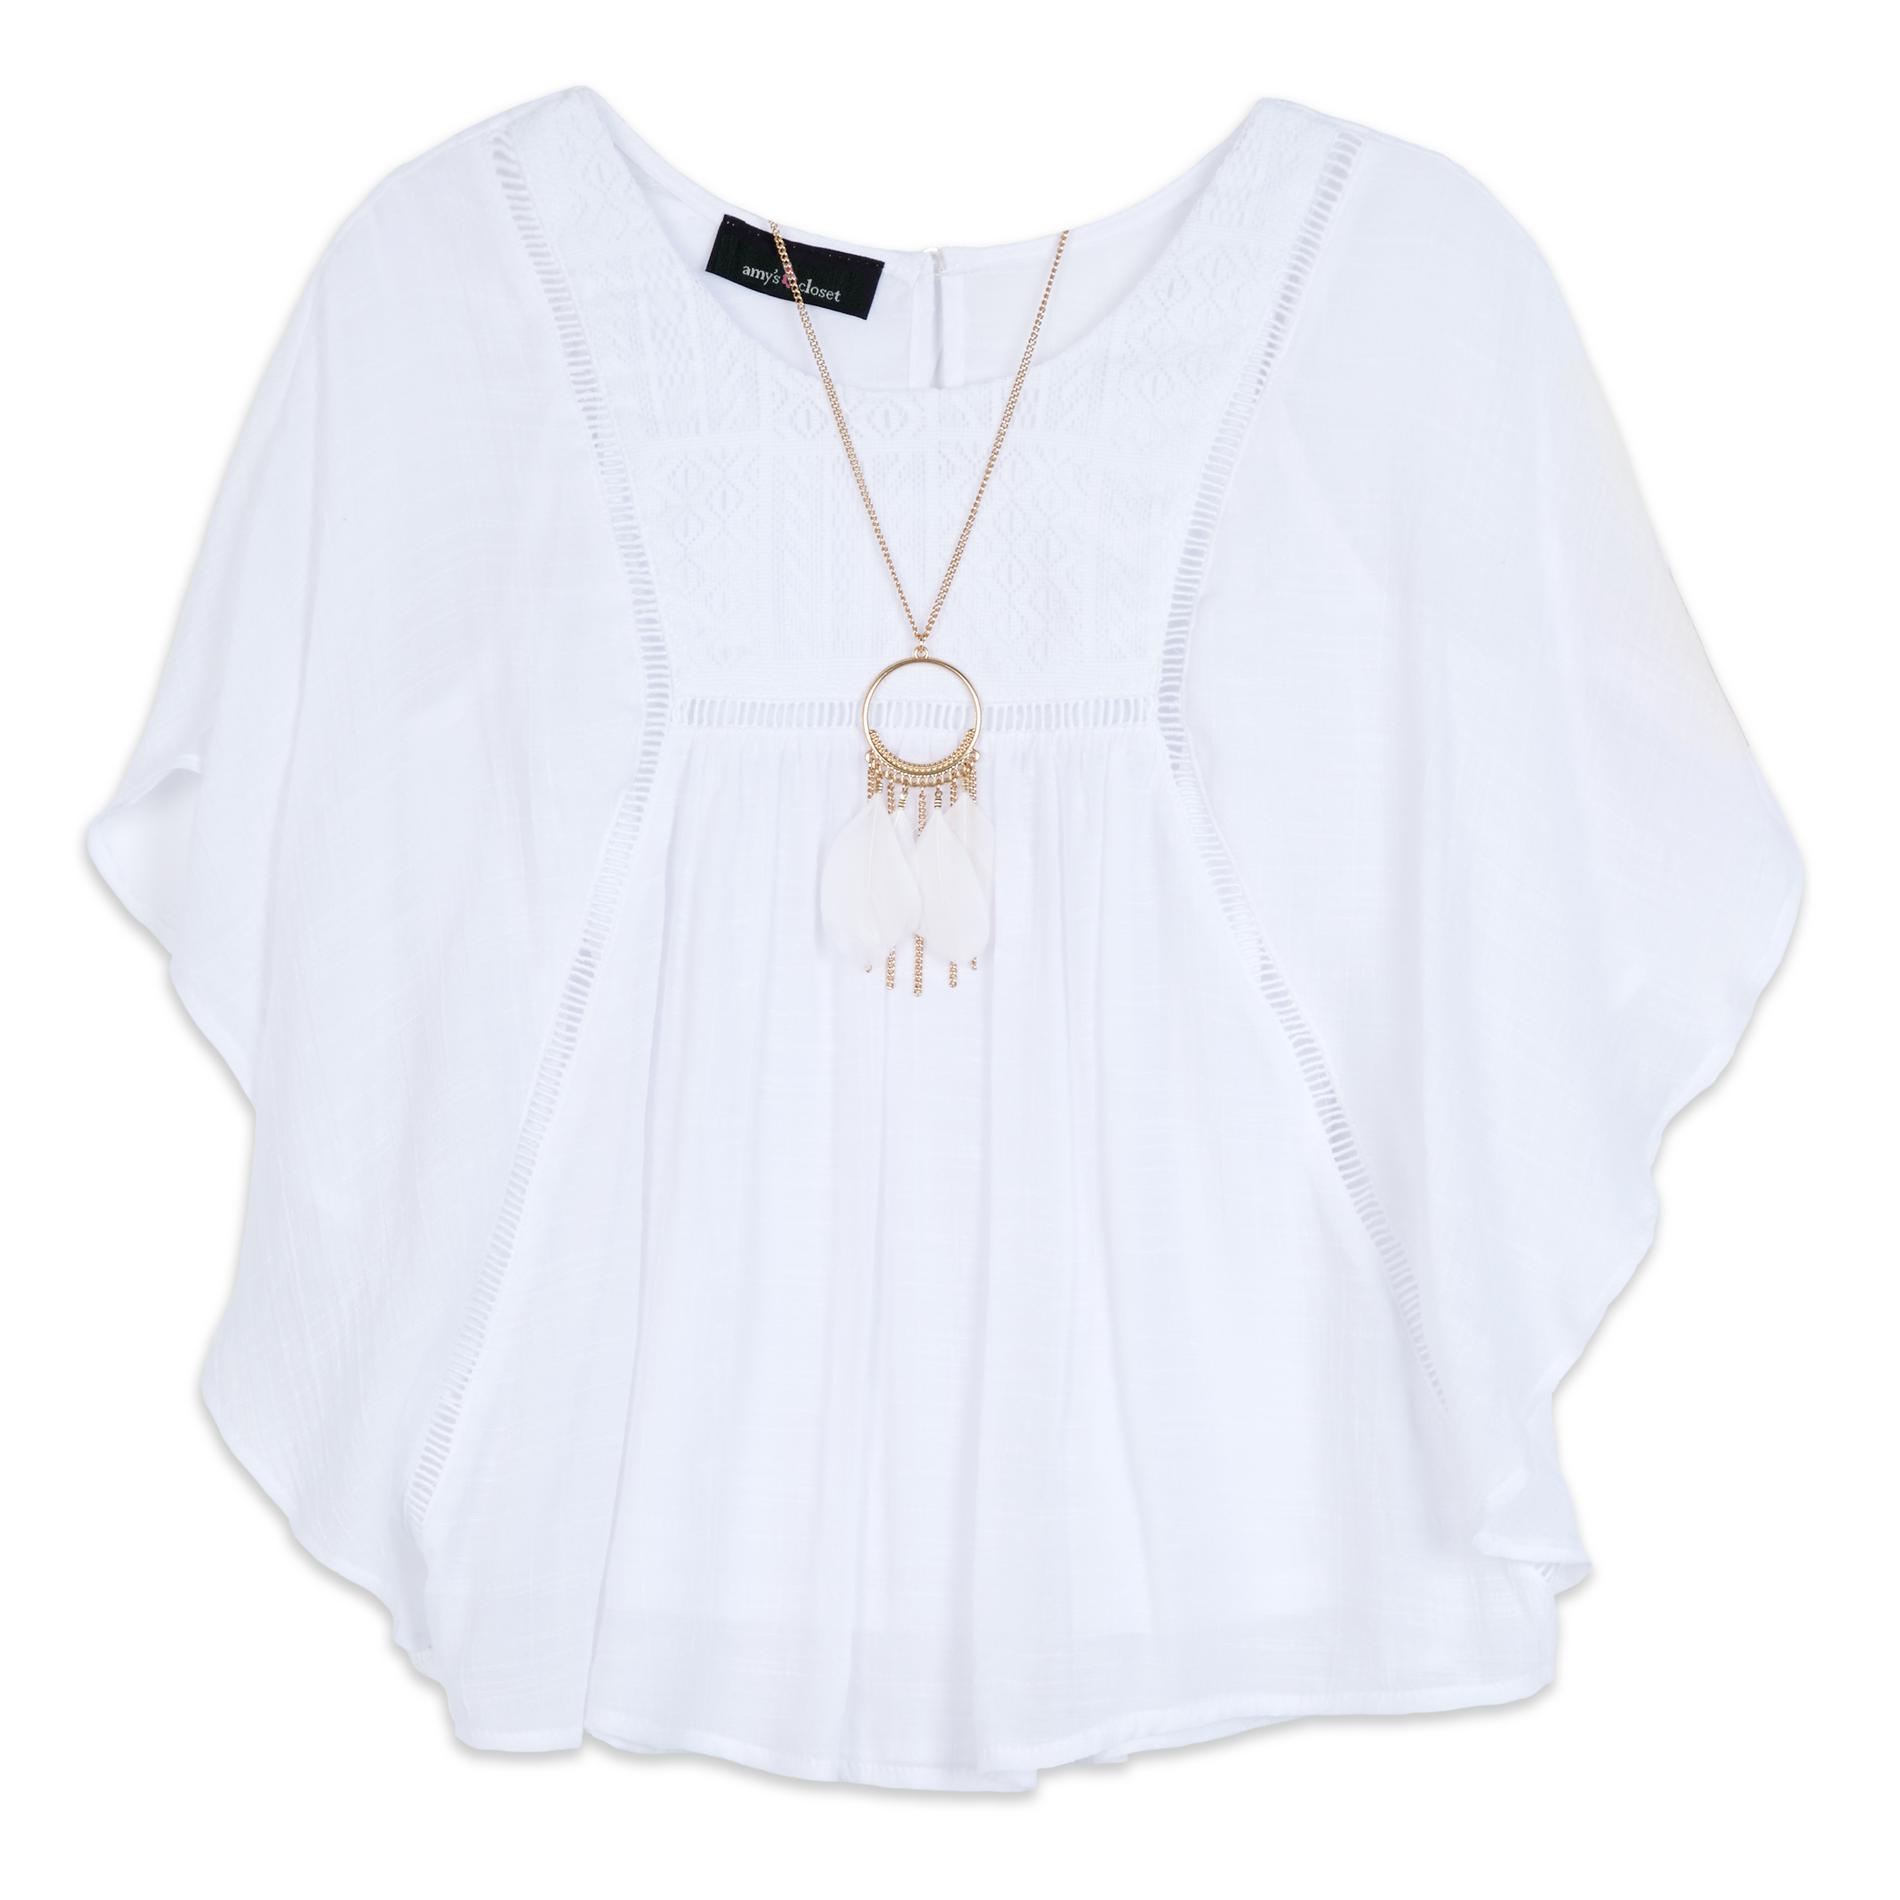 Amy's Closet Girls' Poncho Top & Necklace